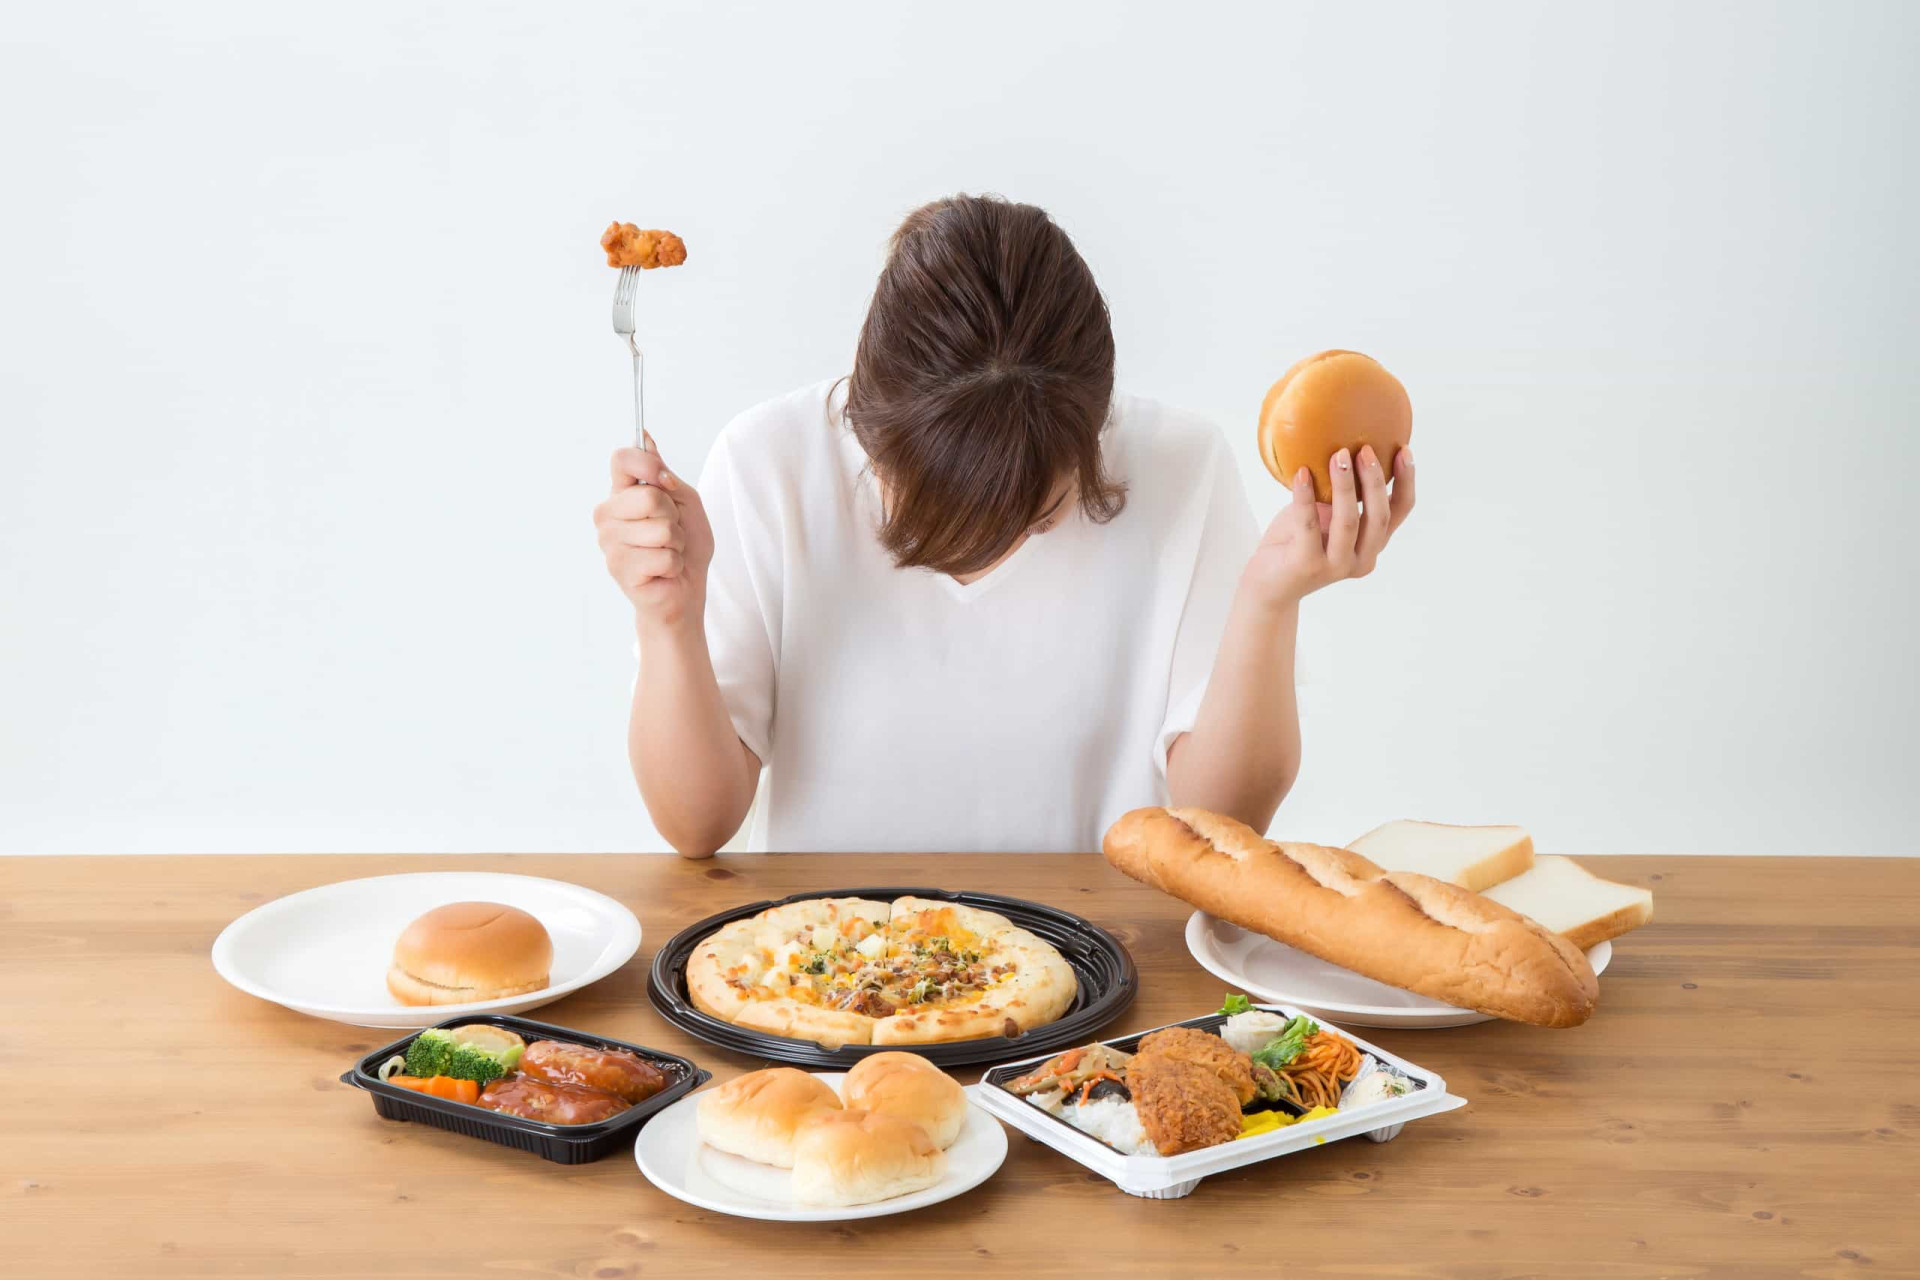 <p>Binge <a href="https://www.starsinsider.com/celebrity/457021/celebrities-who-have-struggled-with-eating-disorders" rel="noopener">eating disorder</a> is in fact quite a common disorder. In the US alone, it’s three times more common than both bulimia and anorexia combined.</p><p>You may also like:<a href="https://www.starsinsider.com/n/195147?utm_source=msn.com&utm_medium=display&utm_campaign=referral_description&utm_content=508078en-en"> The weirdest items confiscated at the Australian border</a></p>